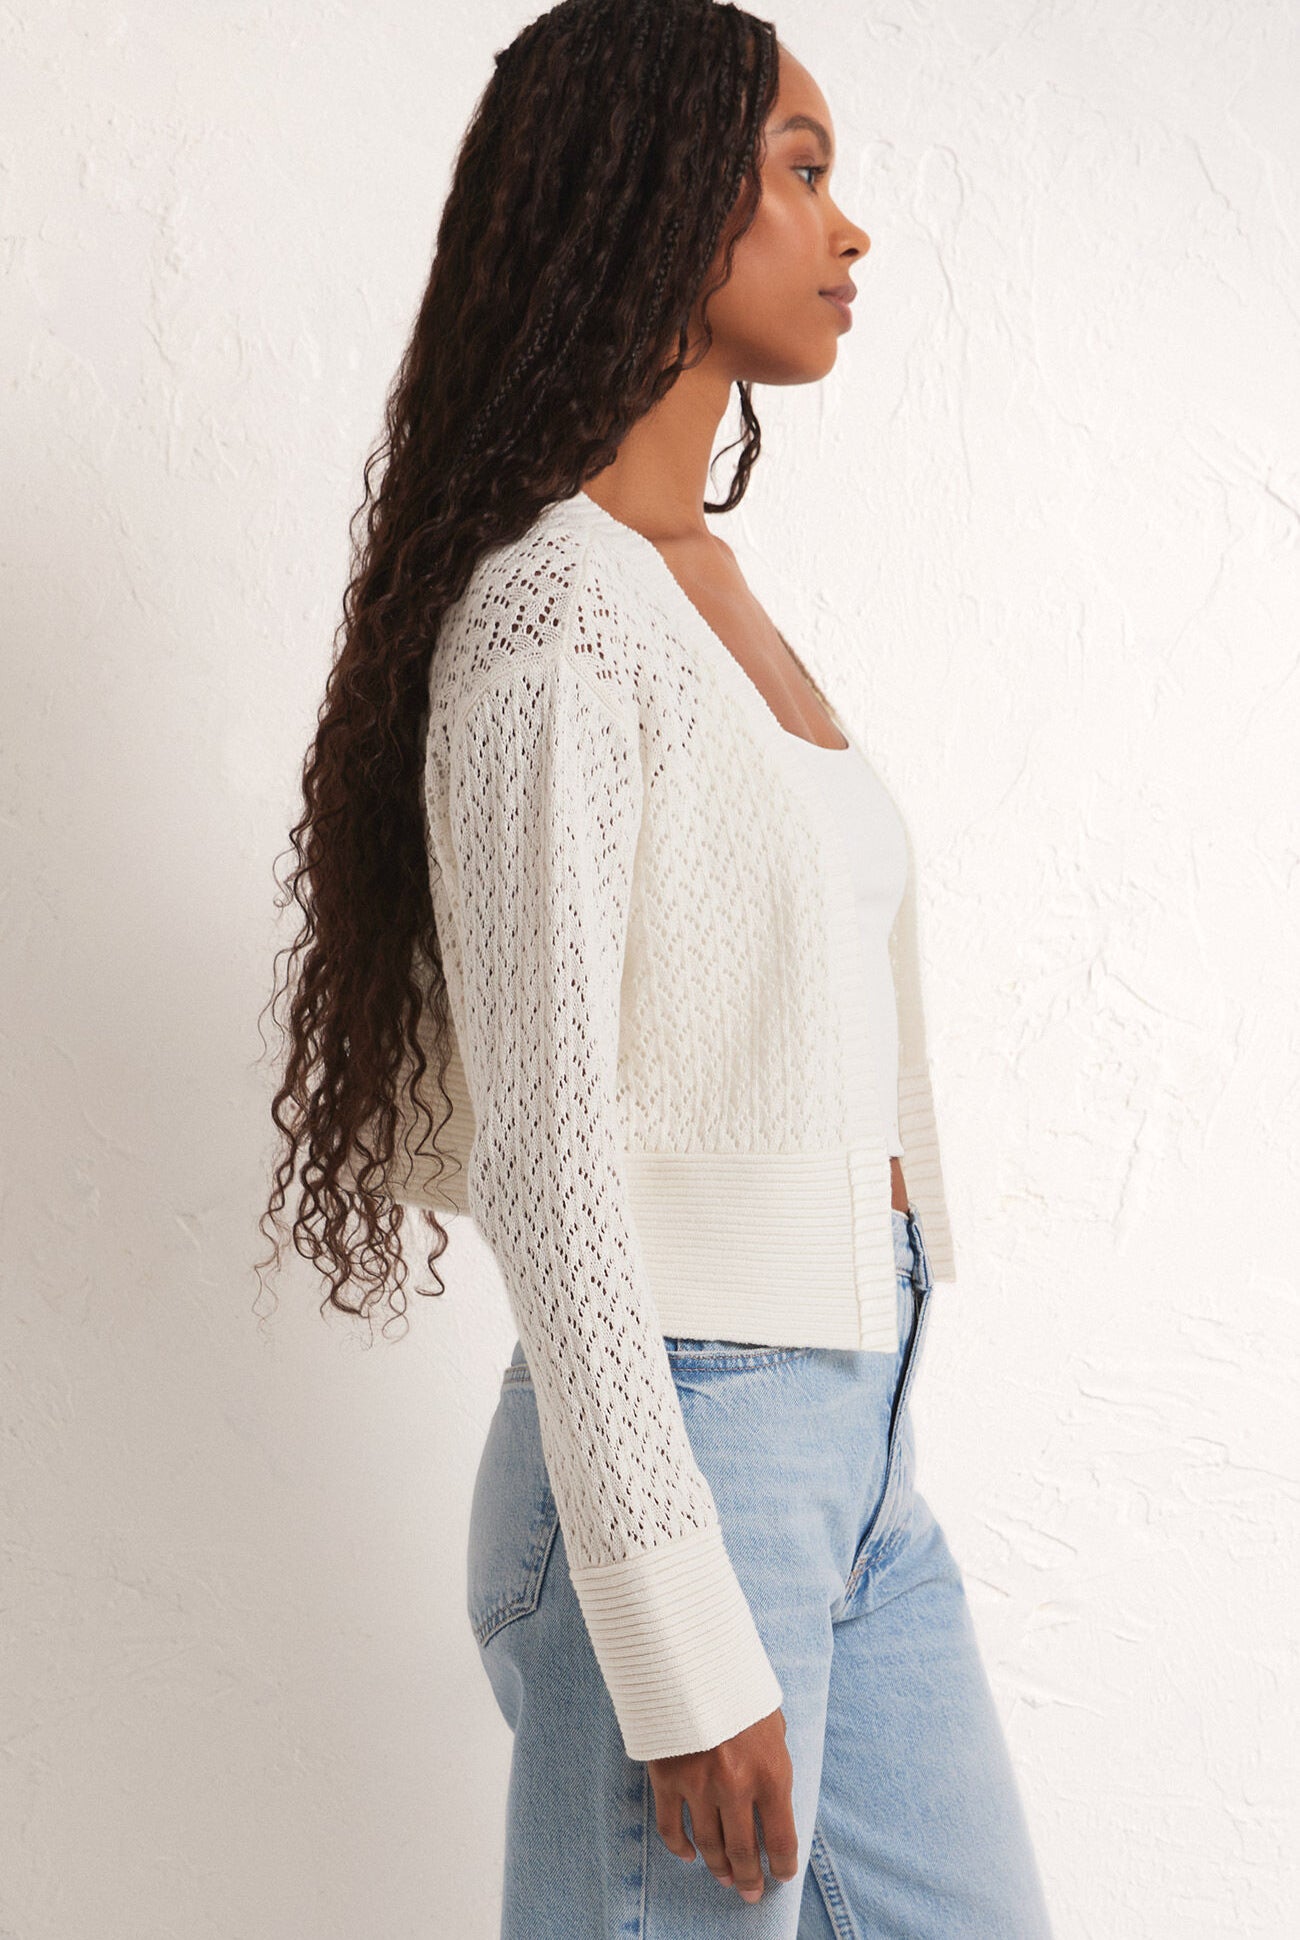 Kapa Cardigan-Cardigans-Vixen Collection, Day Spa and Women's Boutique Located in Seattle, Washington